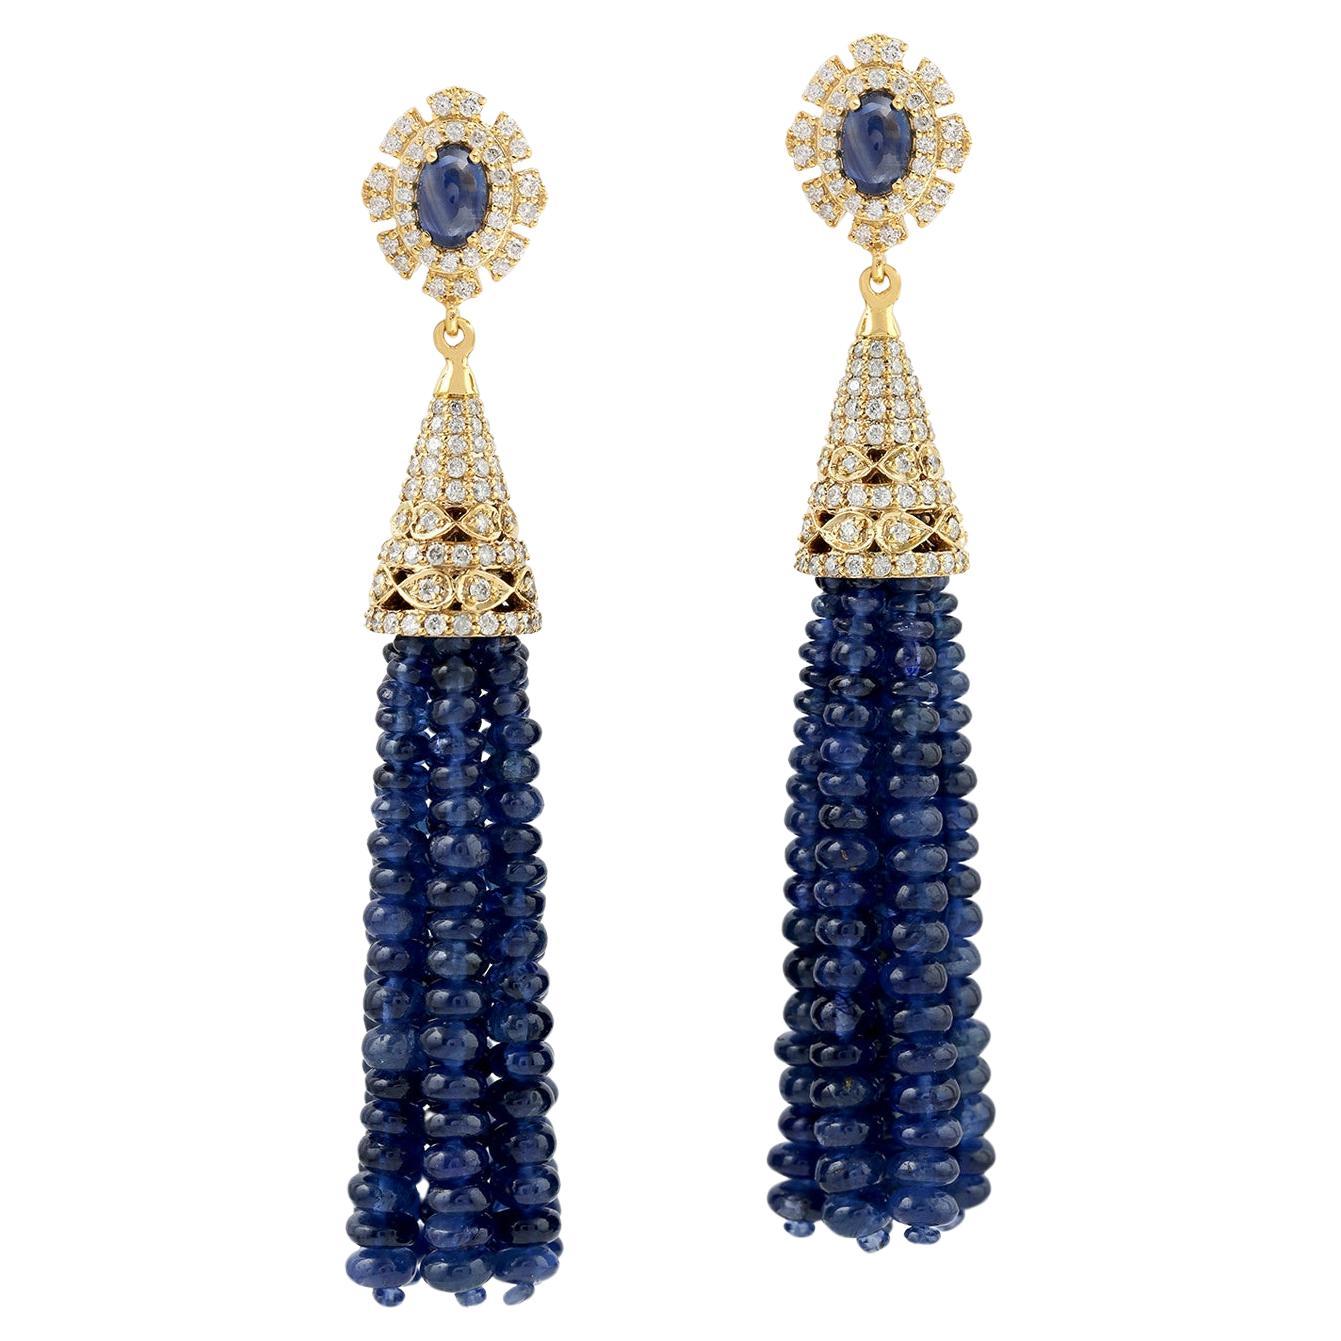 82.67ct Blue Sapphire Tassel Earrings With Diamonds Made In 18k Yellow Gold